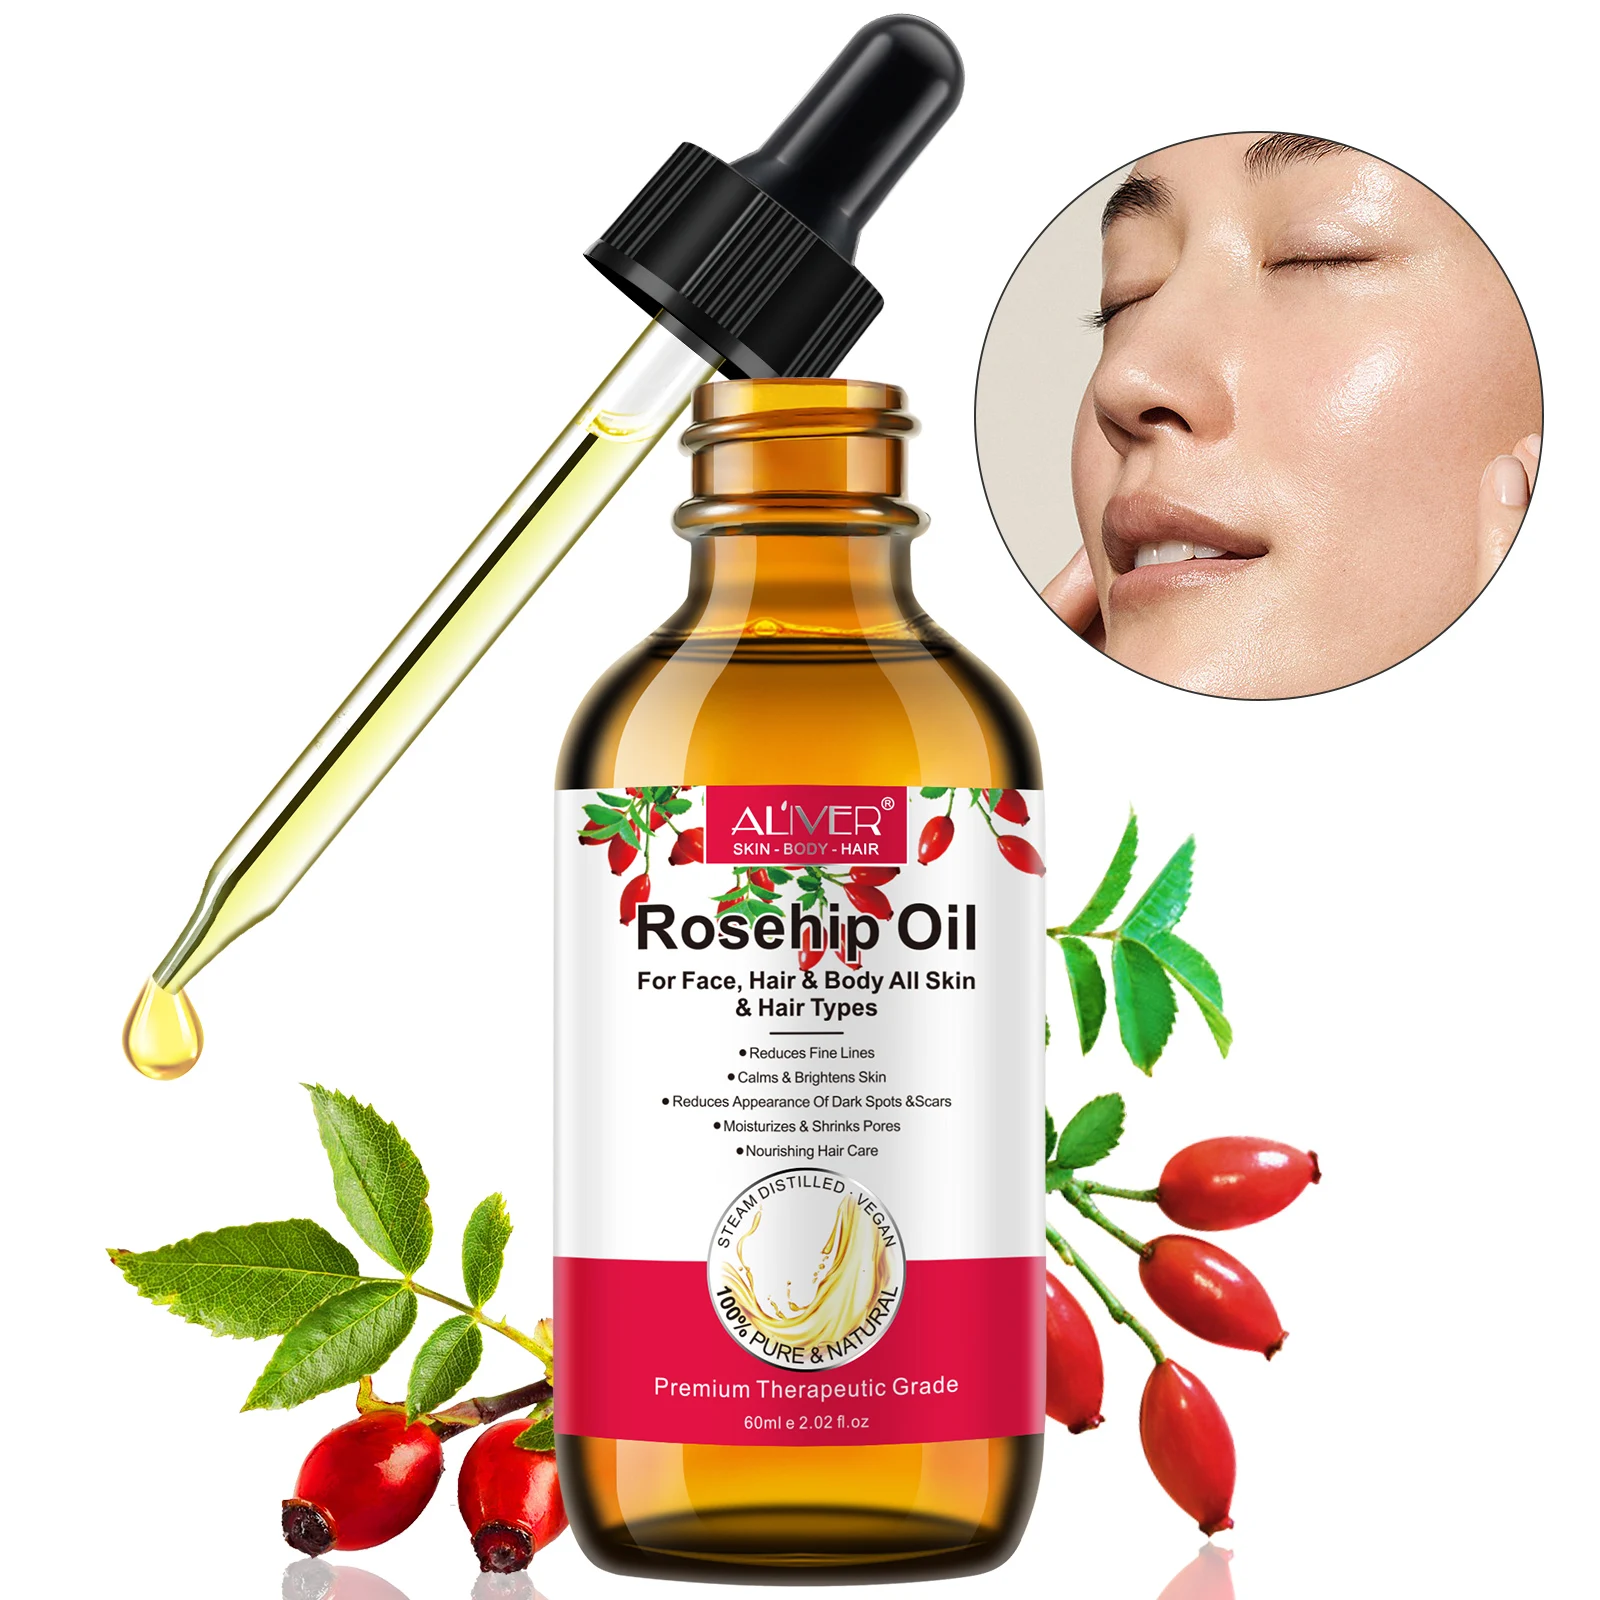 

ALIVER 100% Pure Natural Moisturizing Body Hair Facial Organic Cold Pressed Rosehip Oil